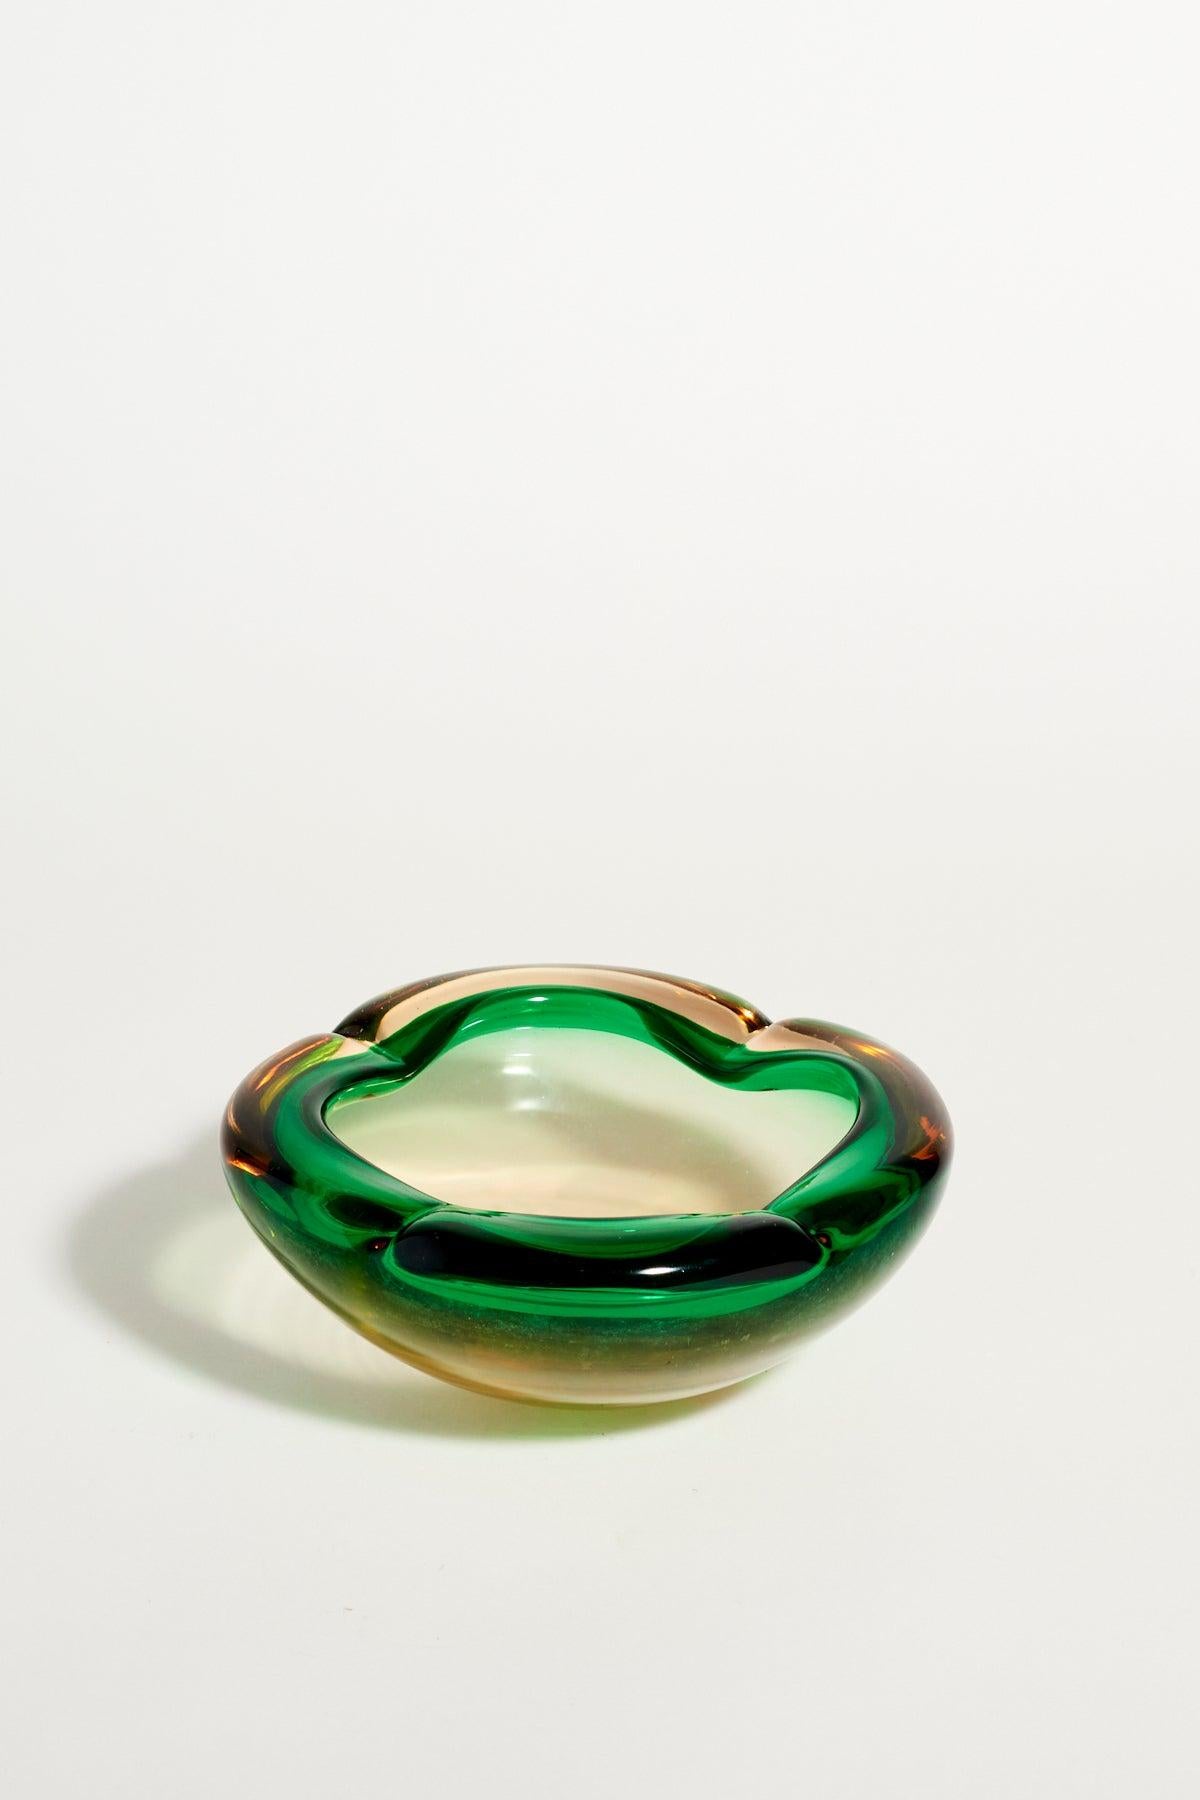 Heavy layered glass bowl with rolled edge in emerald green and amber, made in Italy.